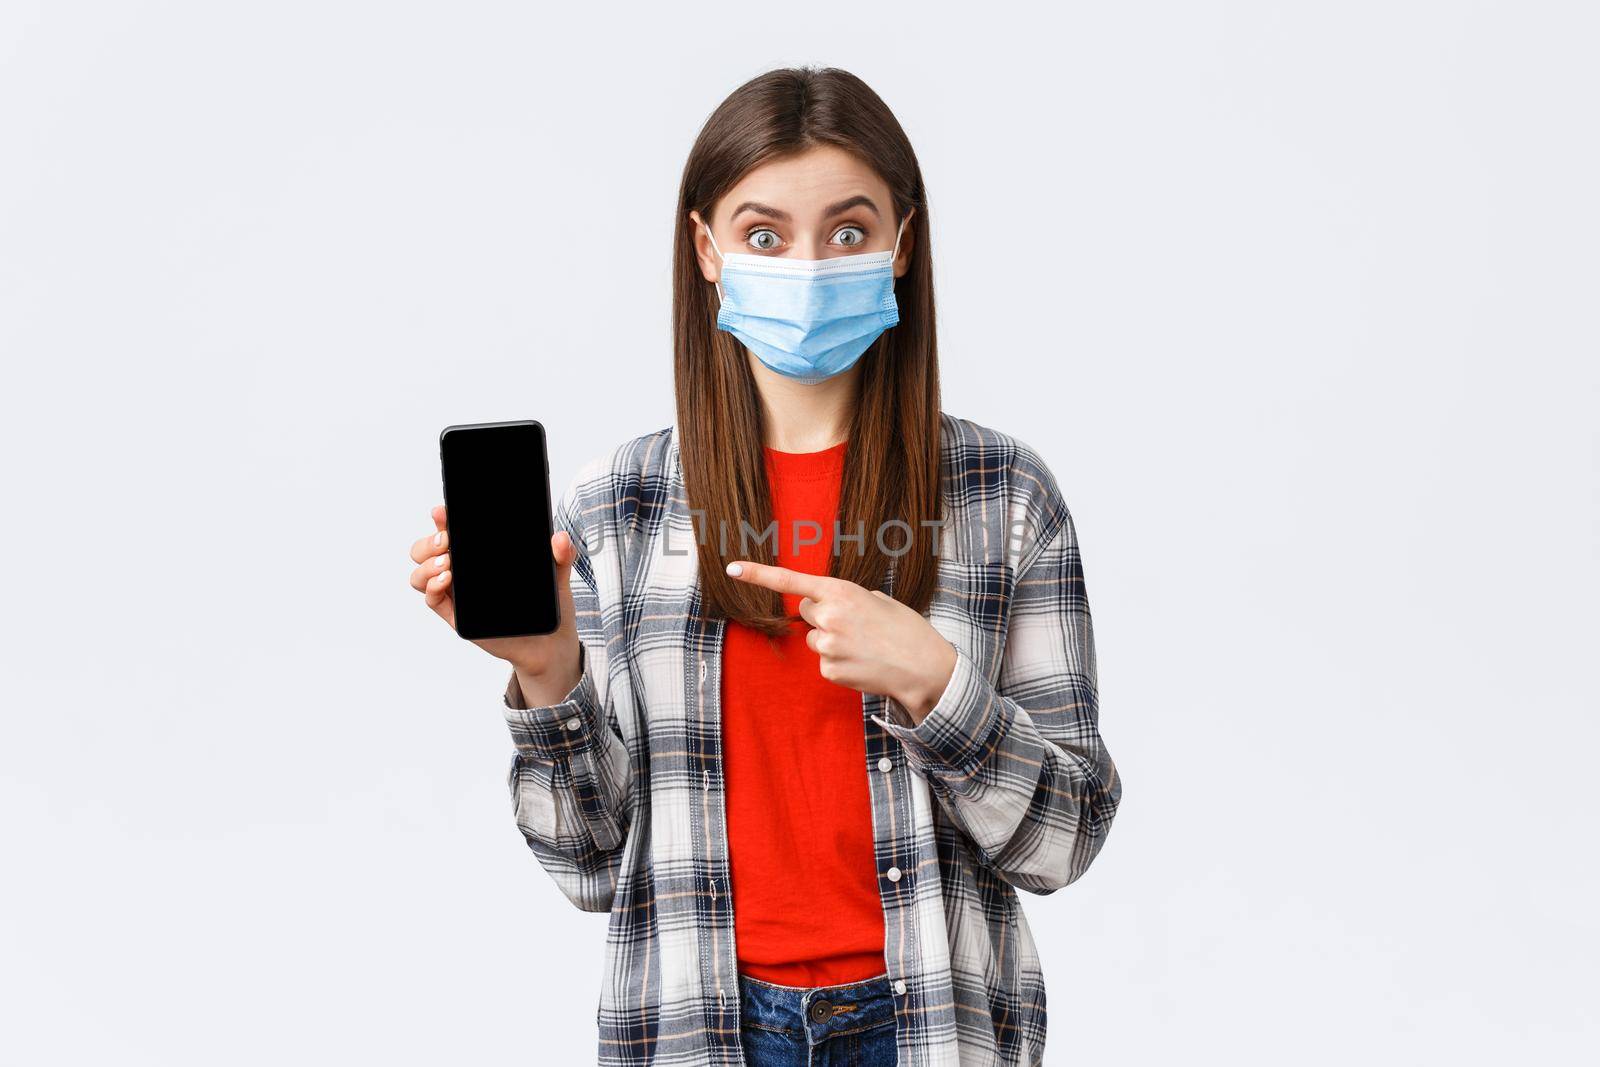 Different emotions, covid-19, social distancing and technology concept. Interested and excited woman in medical mask pointing finger mobile phone screen, promote app or order on shopping site.